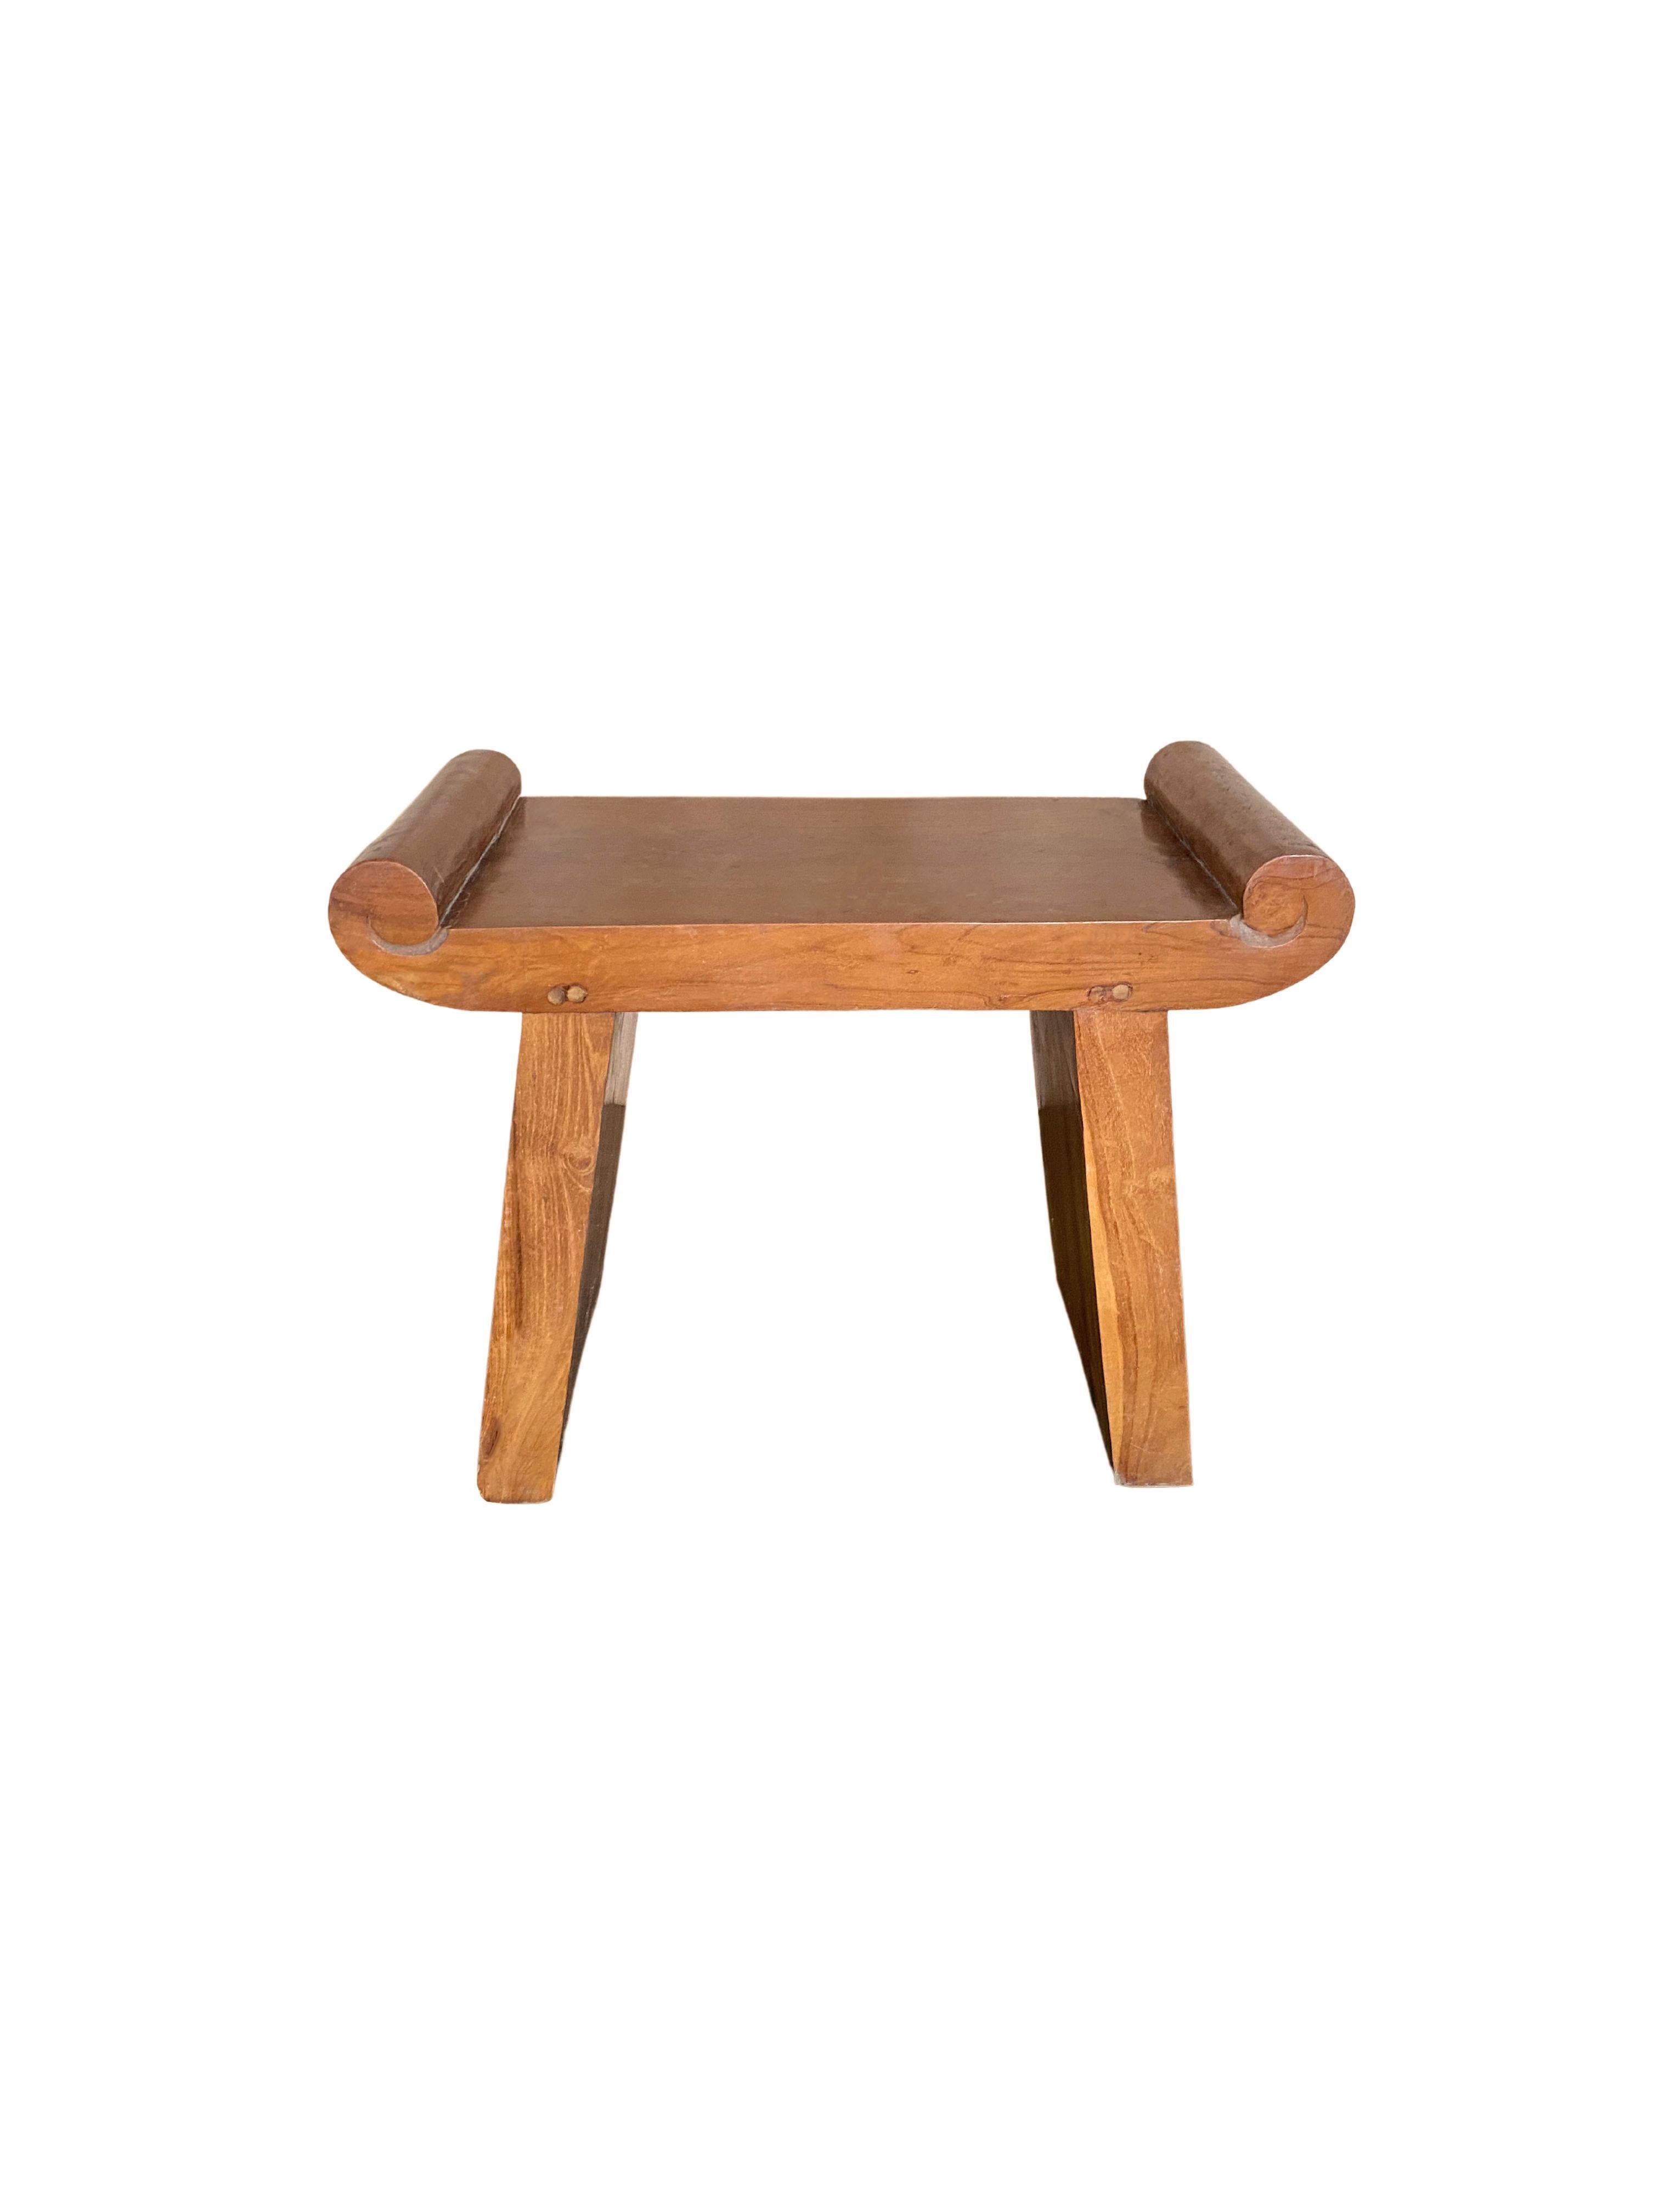 A wonderfully sculptural teak wood stool. The seats subtle wood carved detailing gives it the impression that is has curled ends. The contrast of the curved detailing with the stools angular legs adds to its charm. Its subtle wood textures and